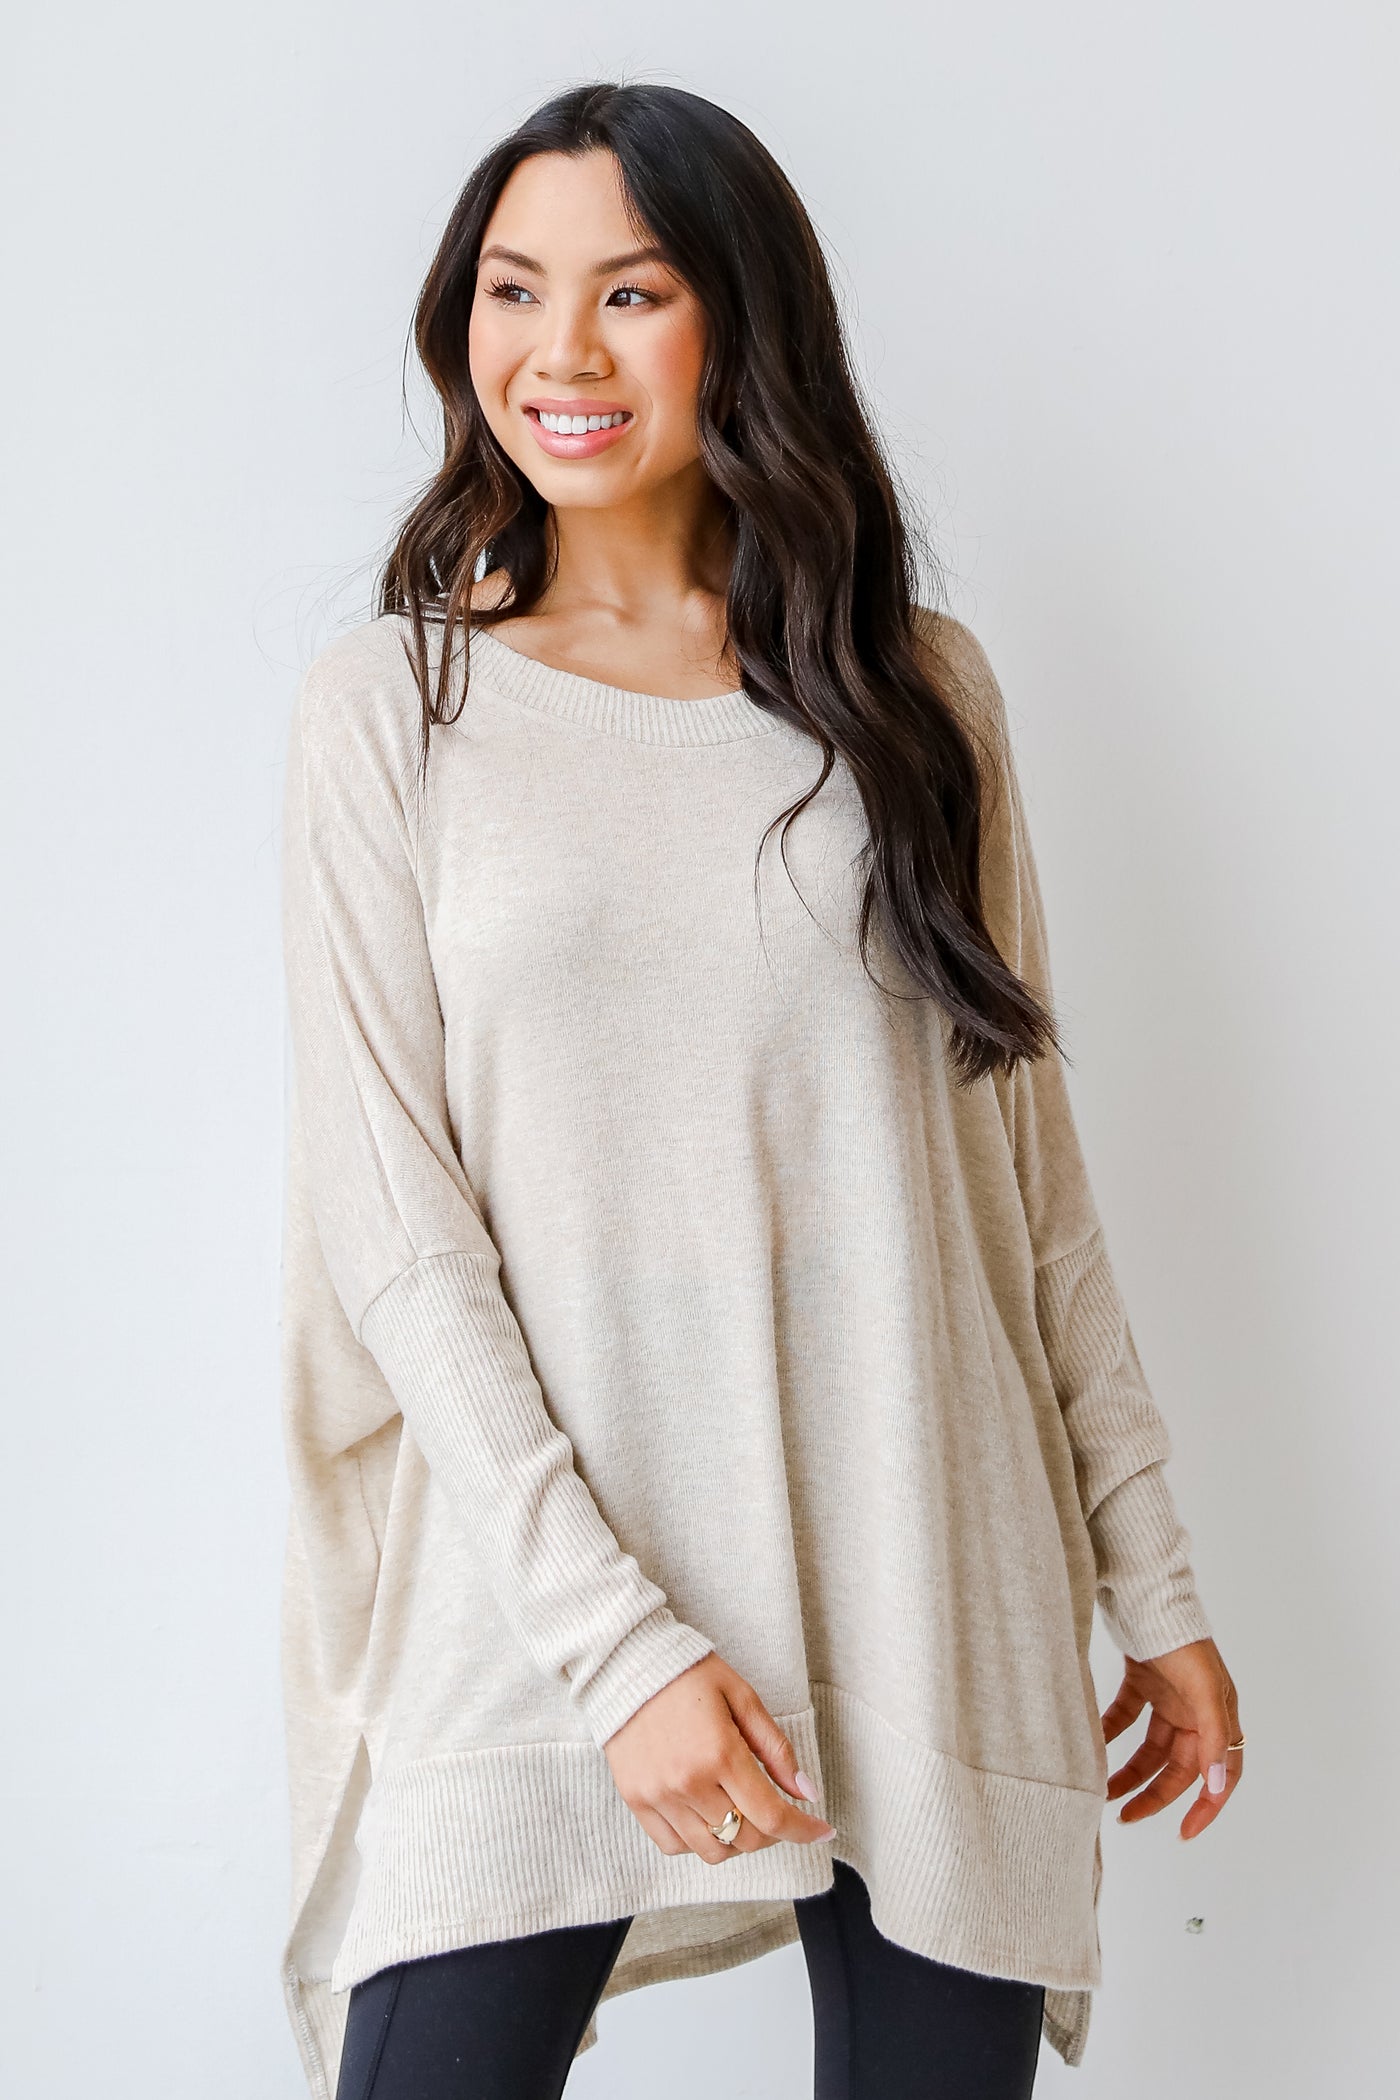 Brushed Knit Top in oatmeal front view